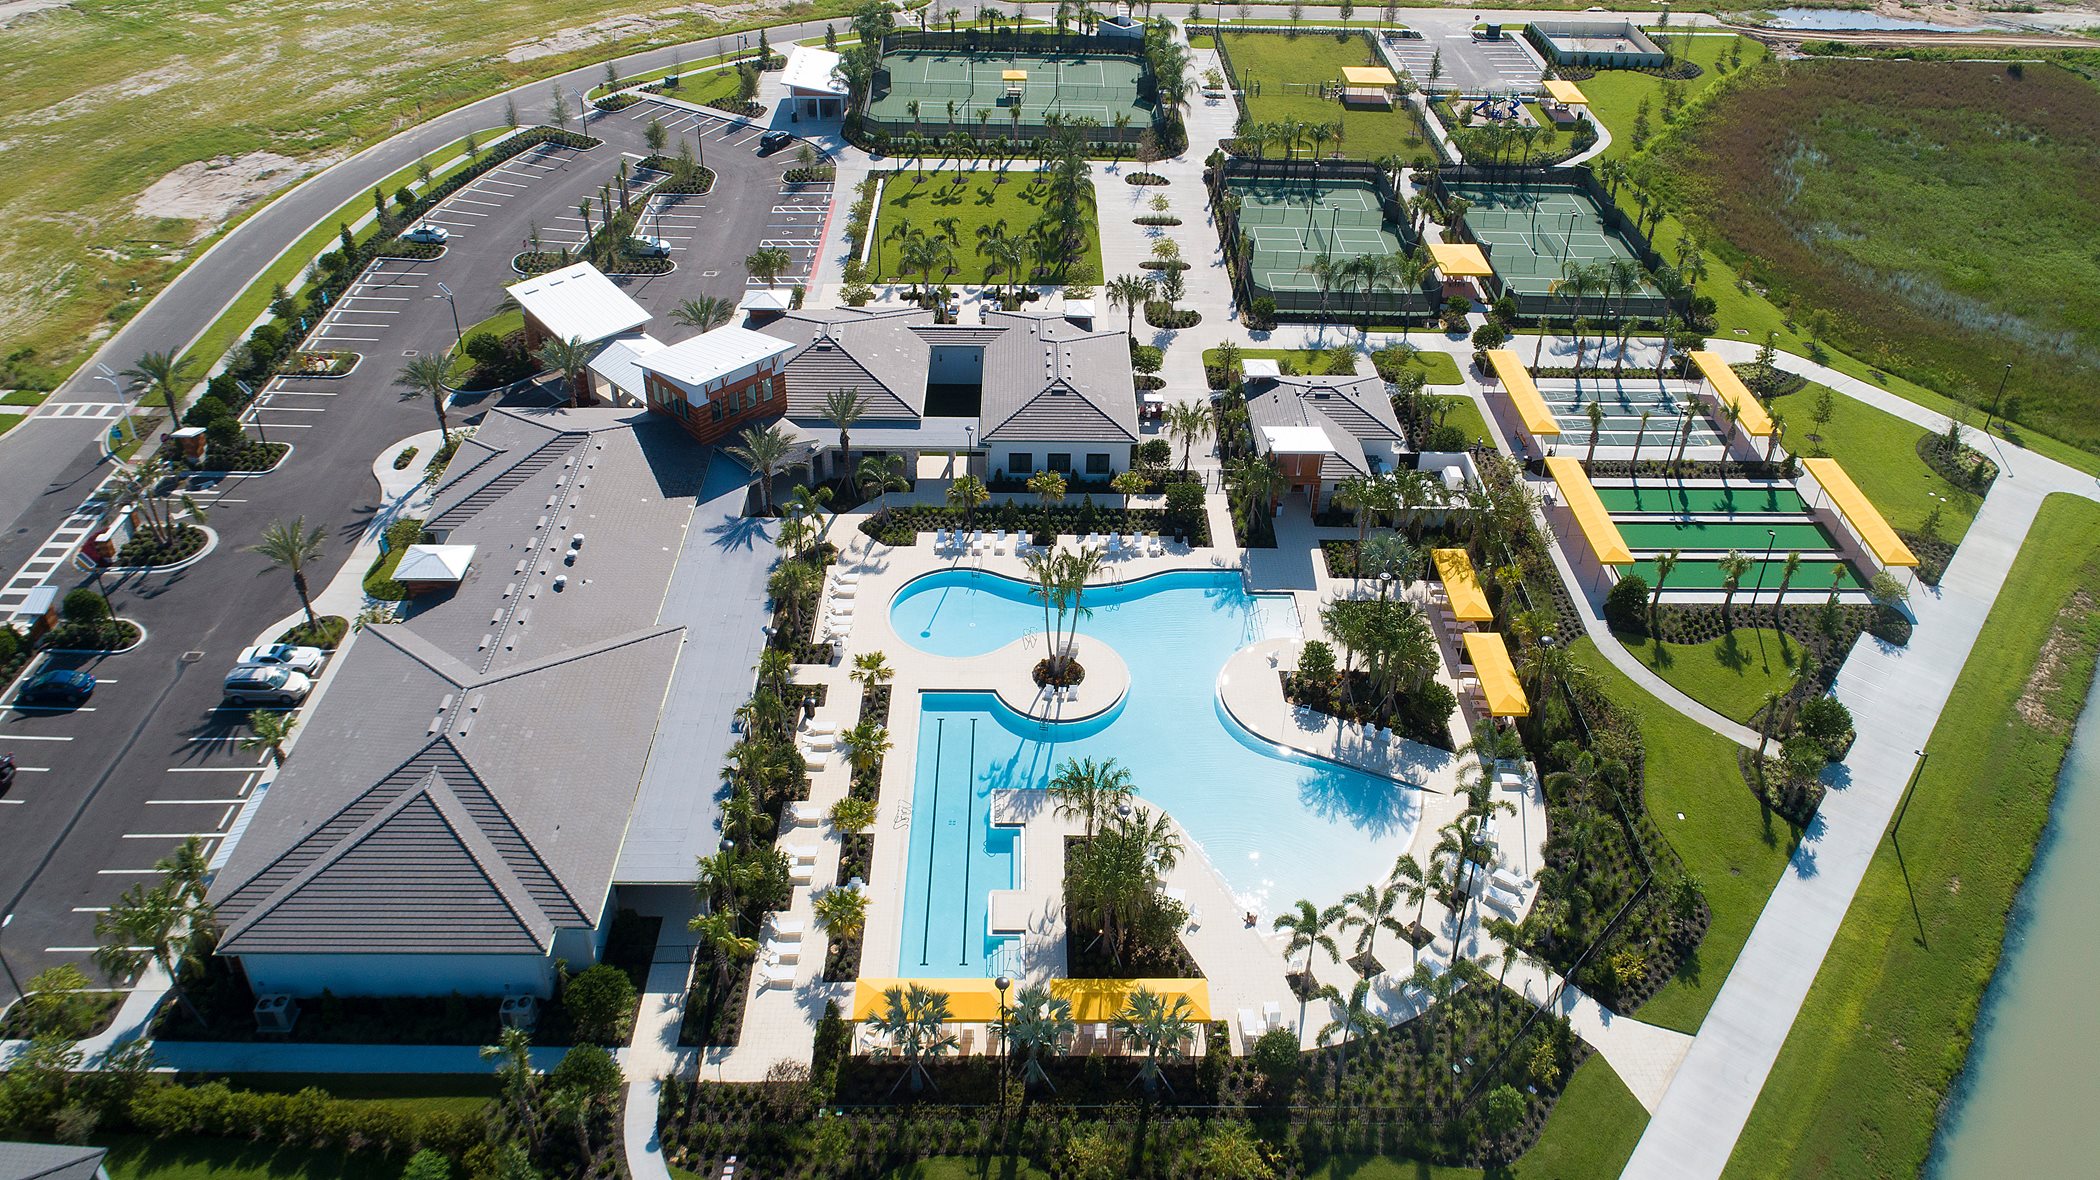 Drone view of Medley at Mirada clubhouse and amenities